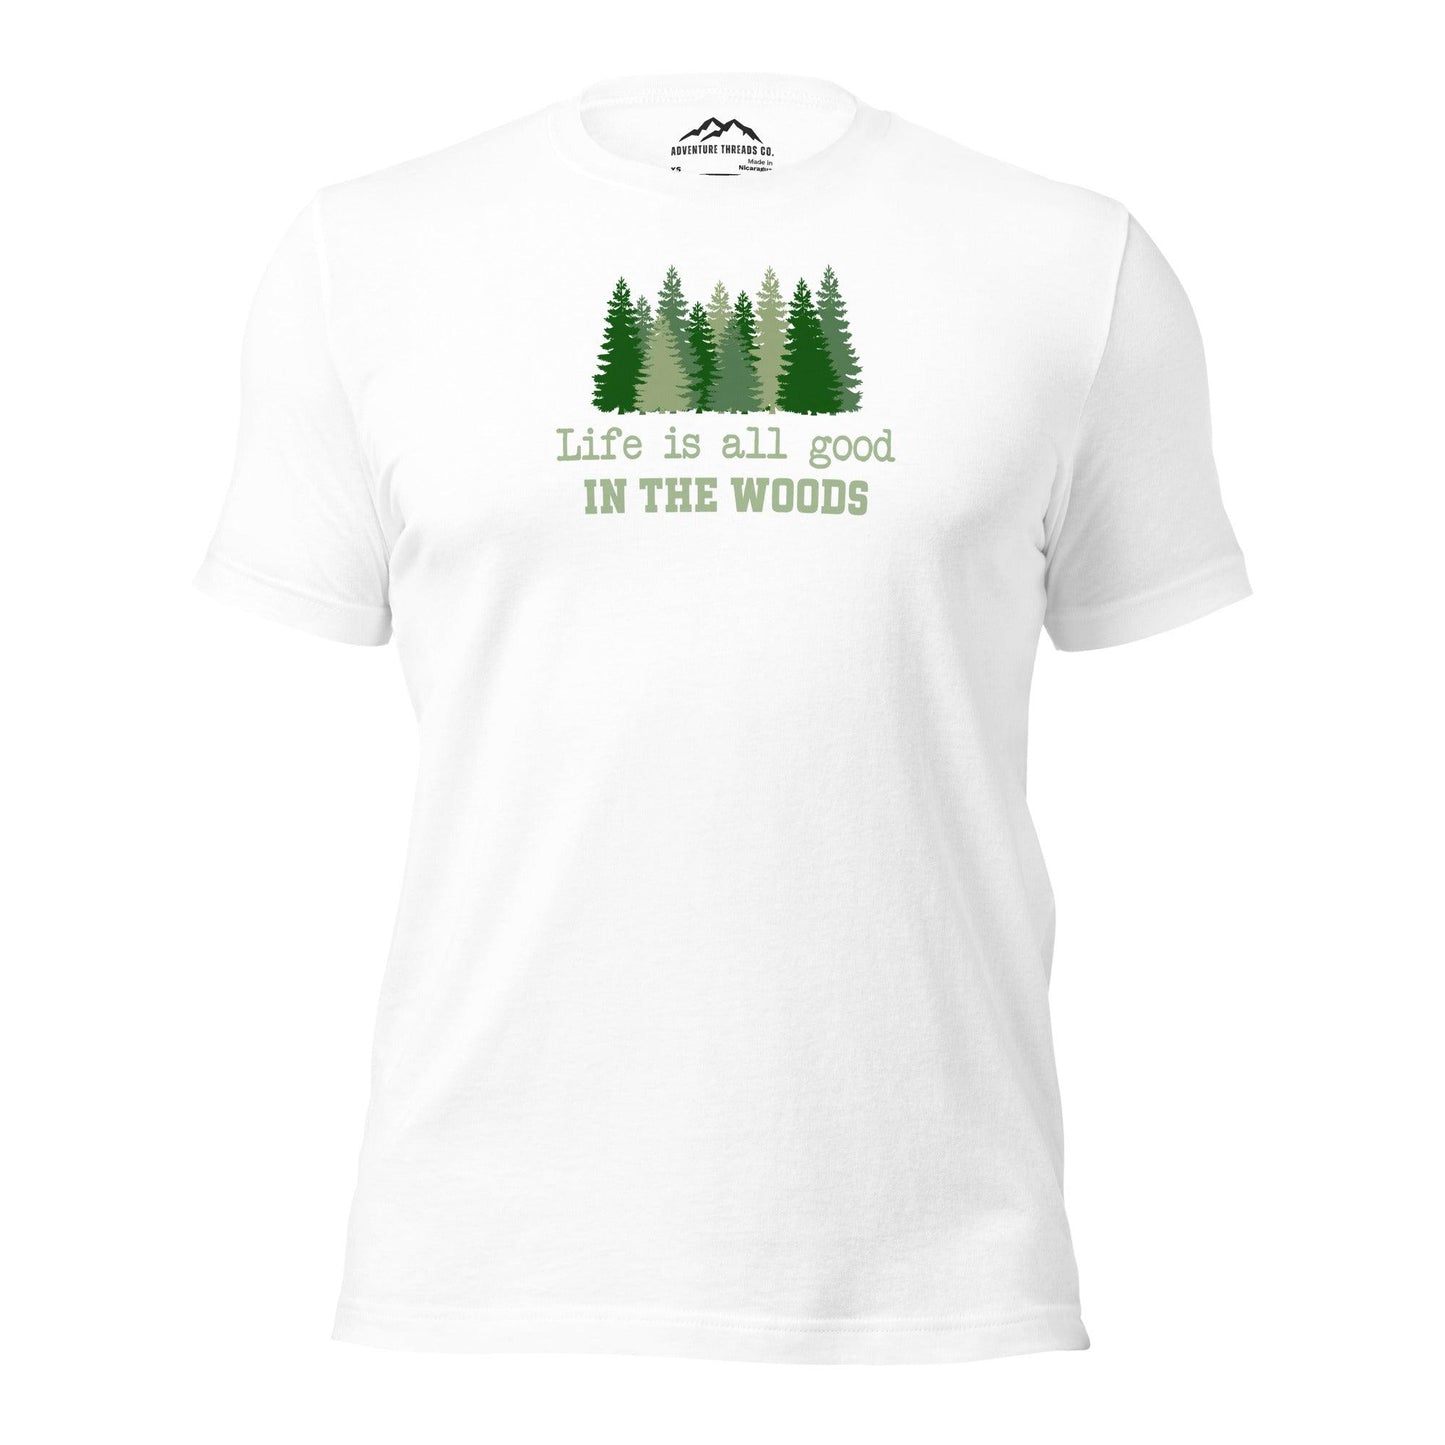 All Good in the Woods T-Shirt - Adventure Threads Company